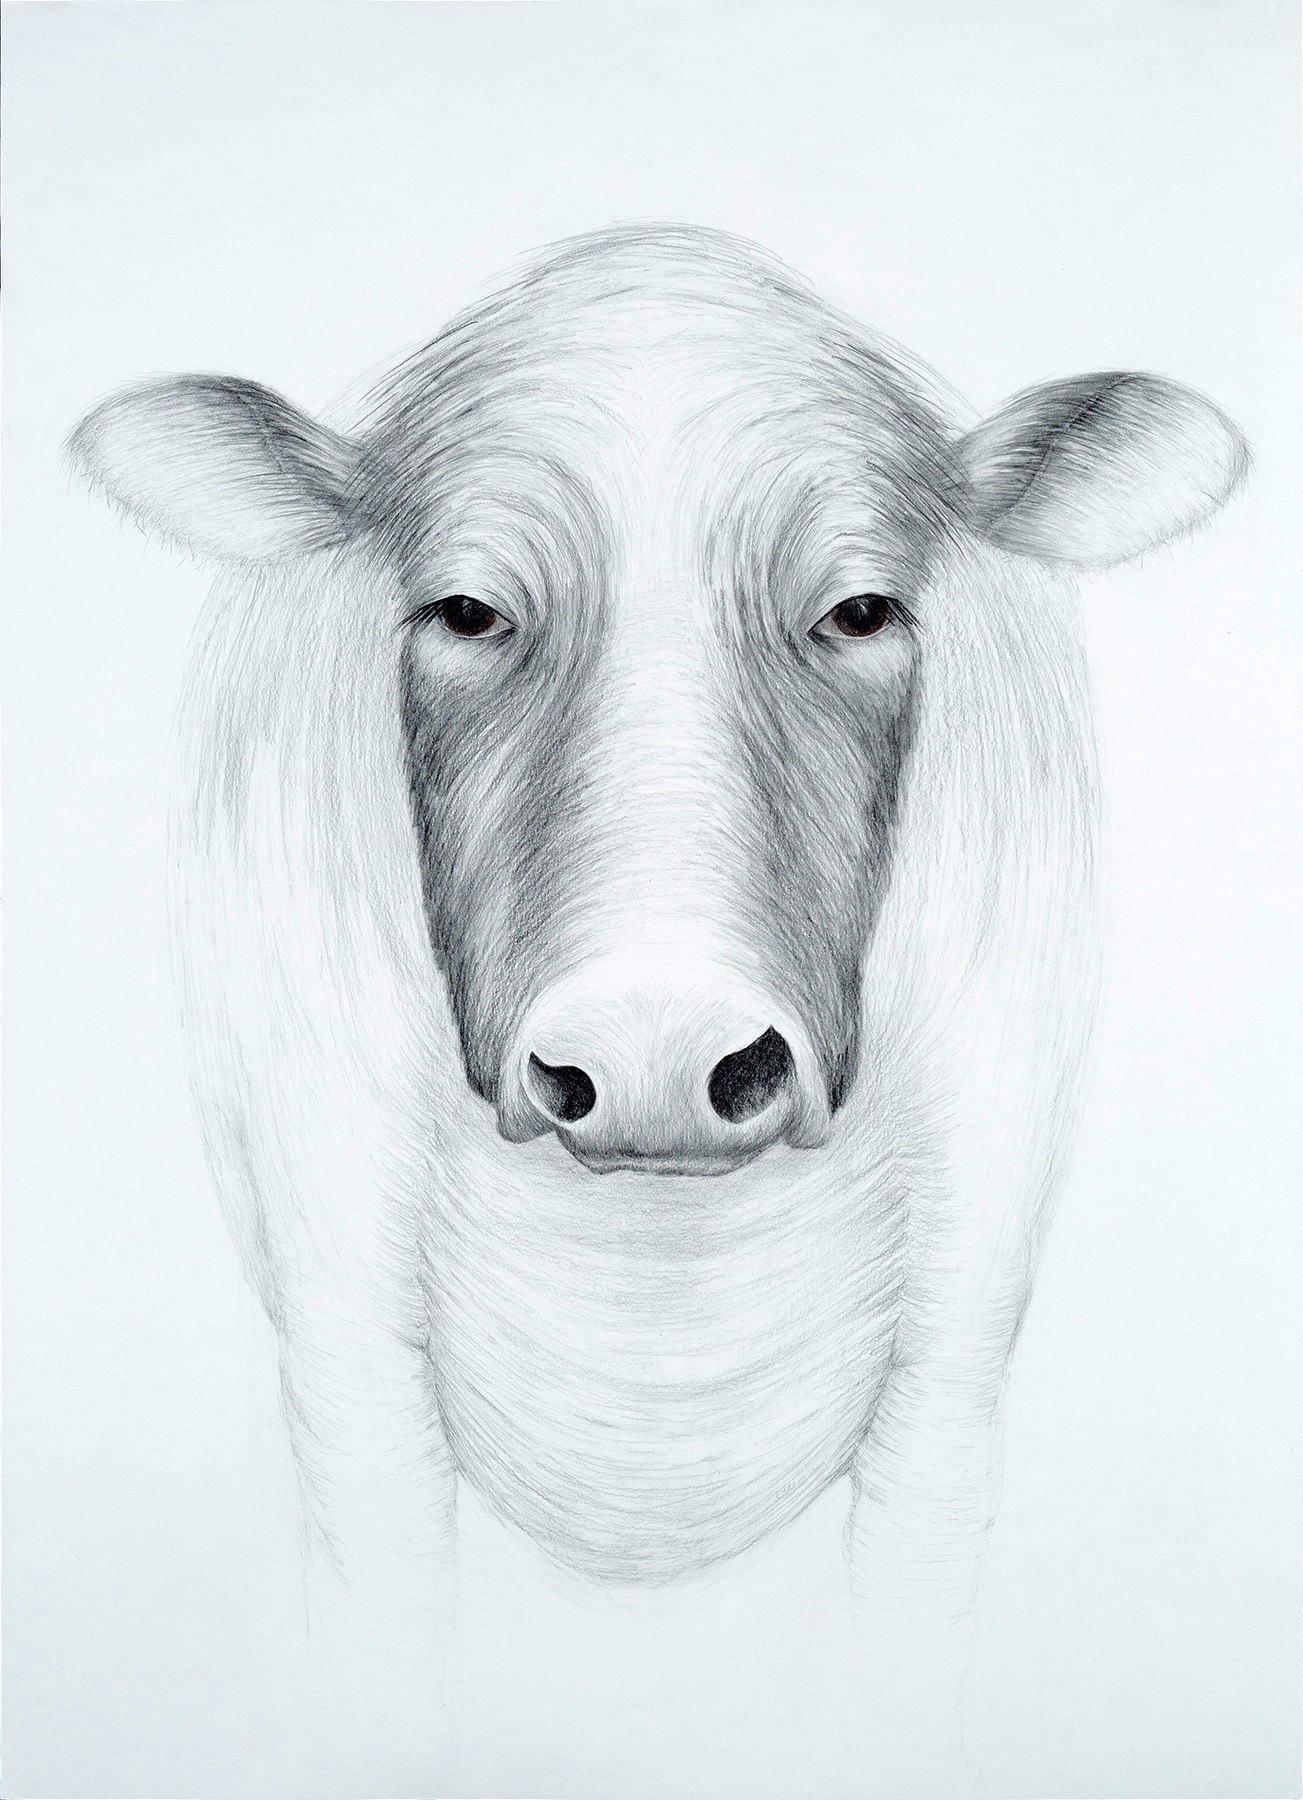   KEEPER OF MY SECRET: COW   Graphite, colored pencil  40 1/2" x 31"" 